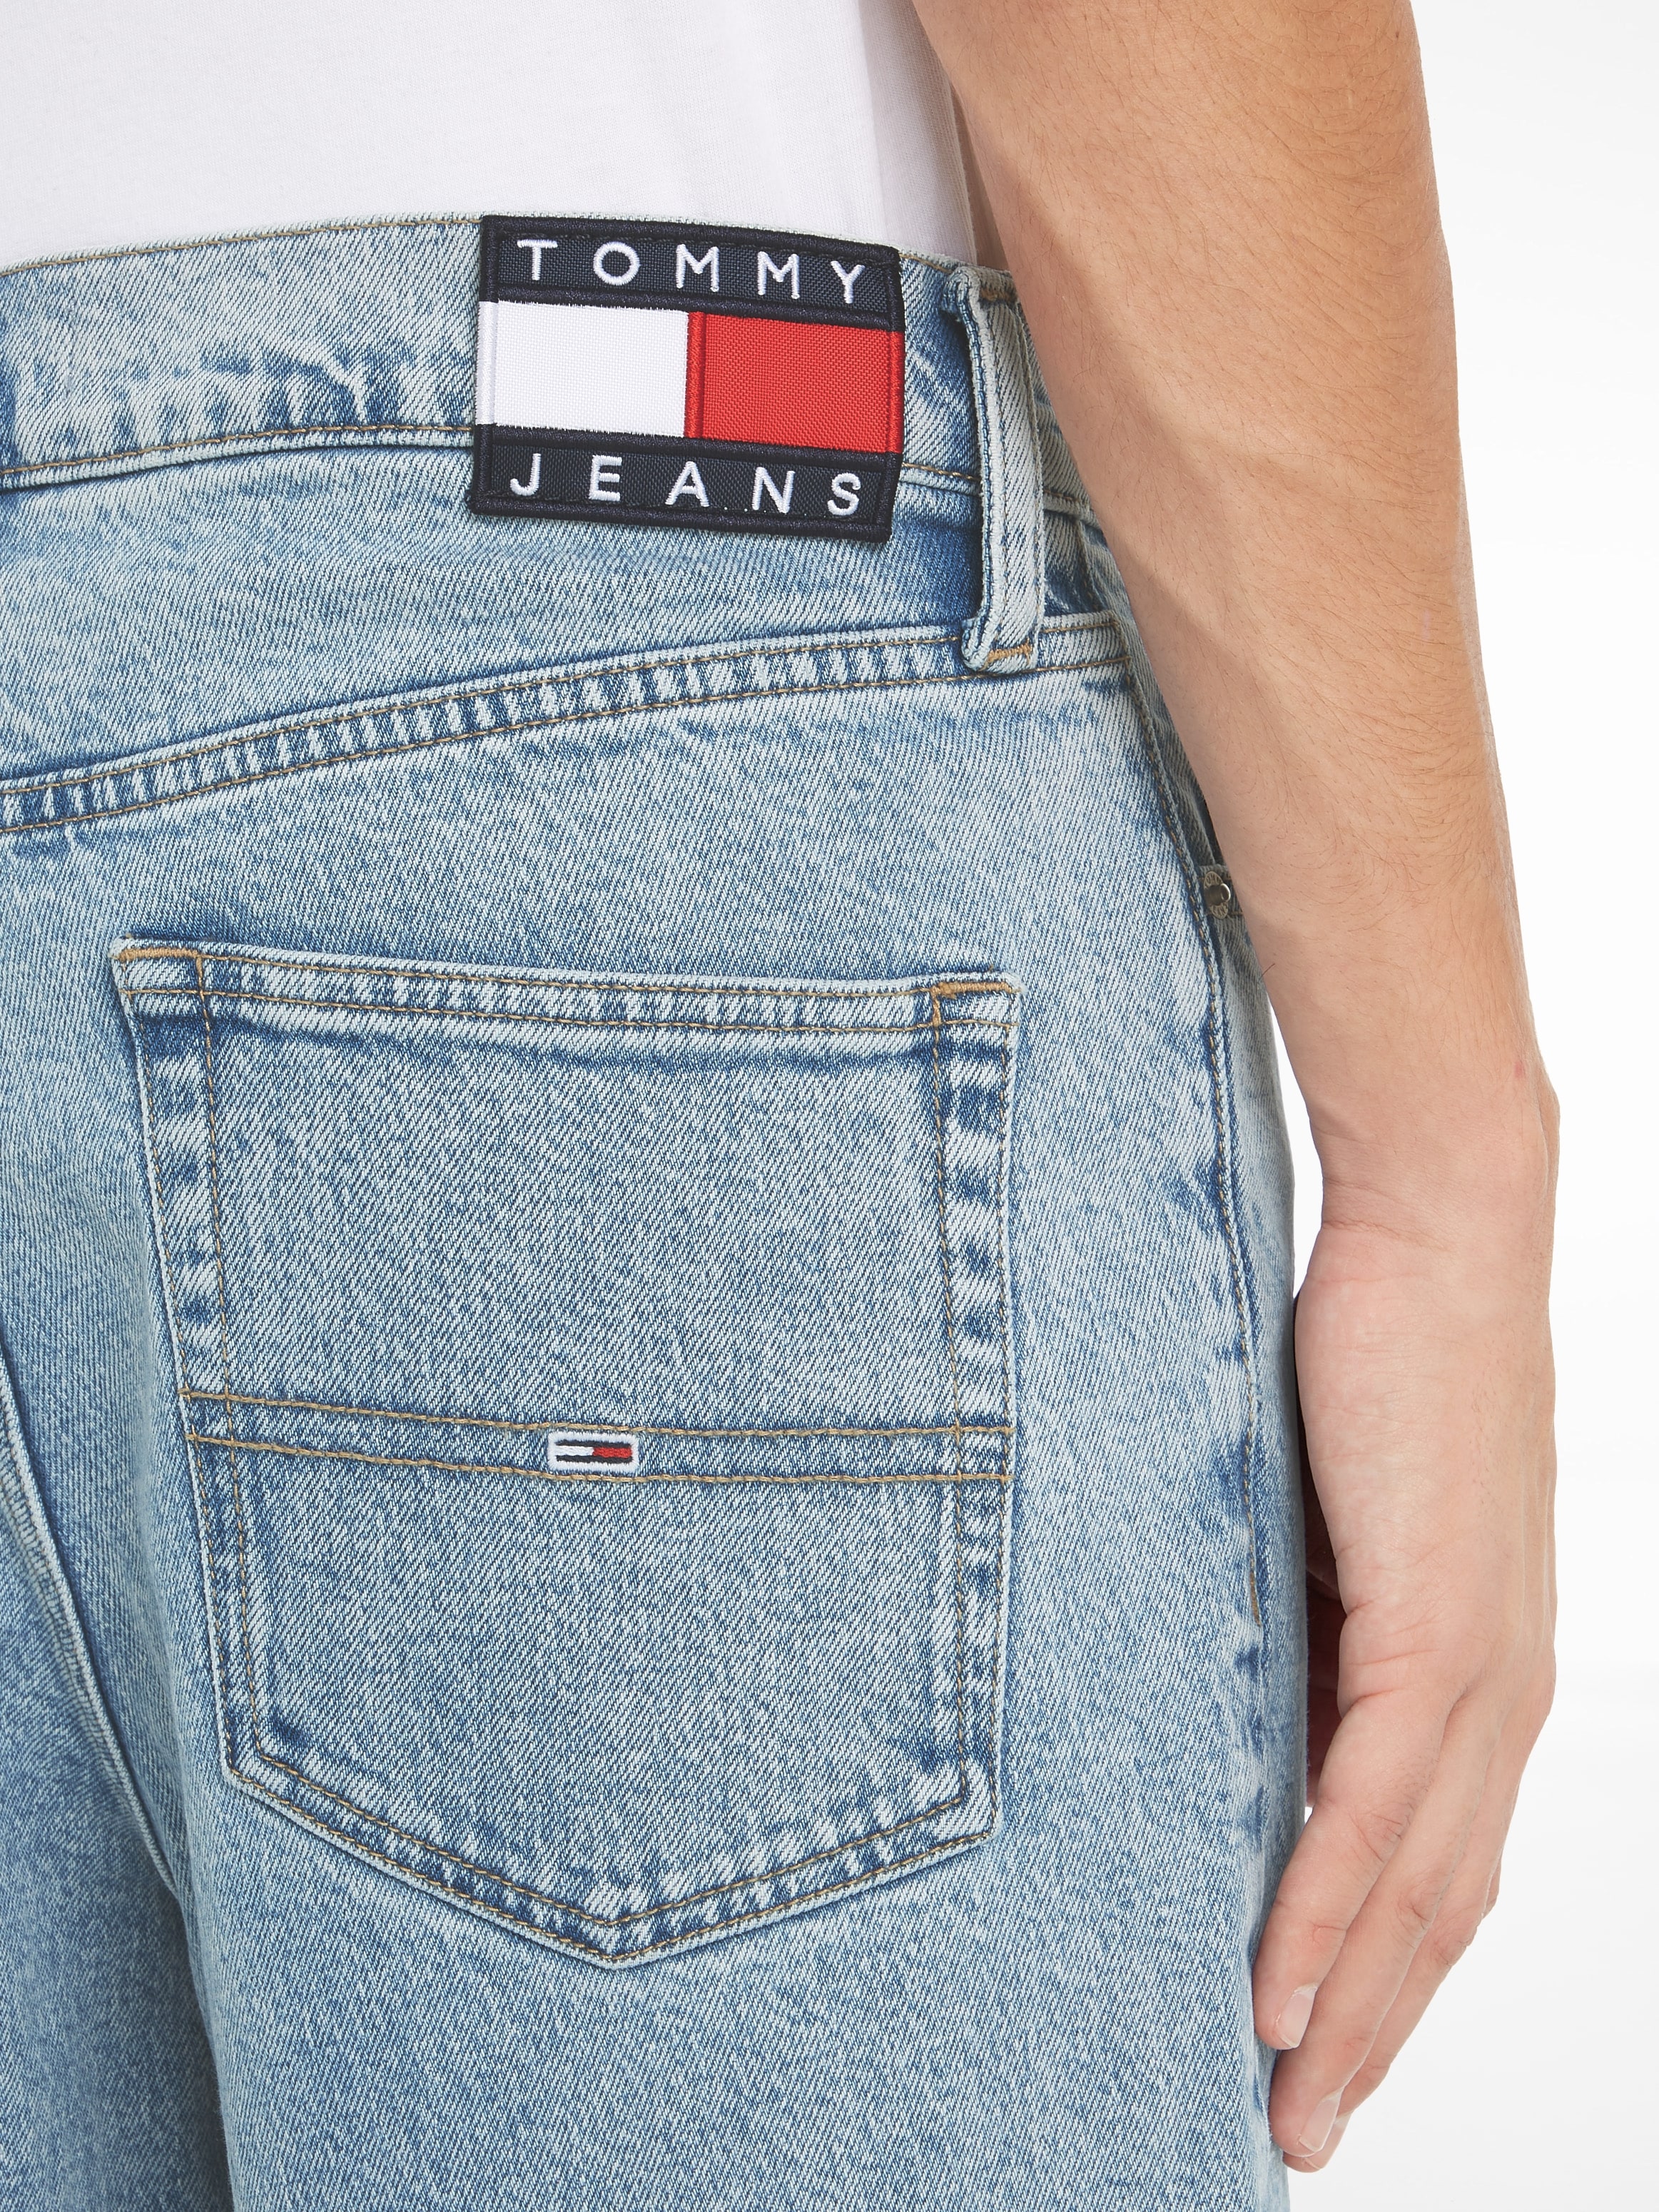 Jeans CG4114« kaufen bei 5-Pocket-Jeans LOOSE »BAX TPRD Tommy OTTO